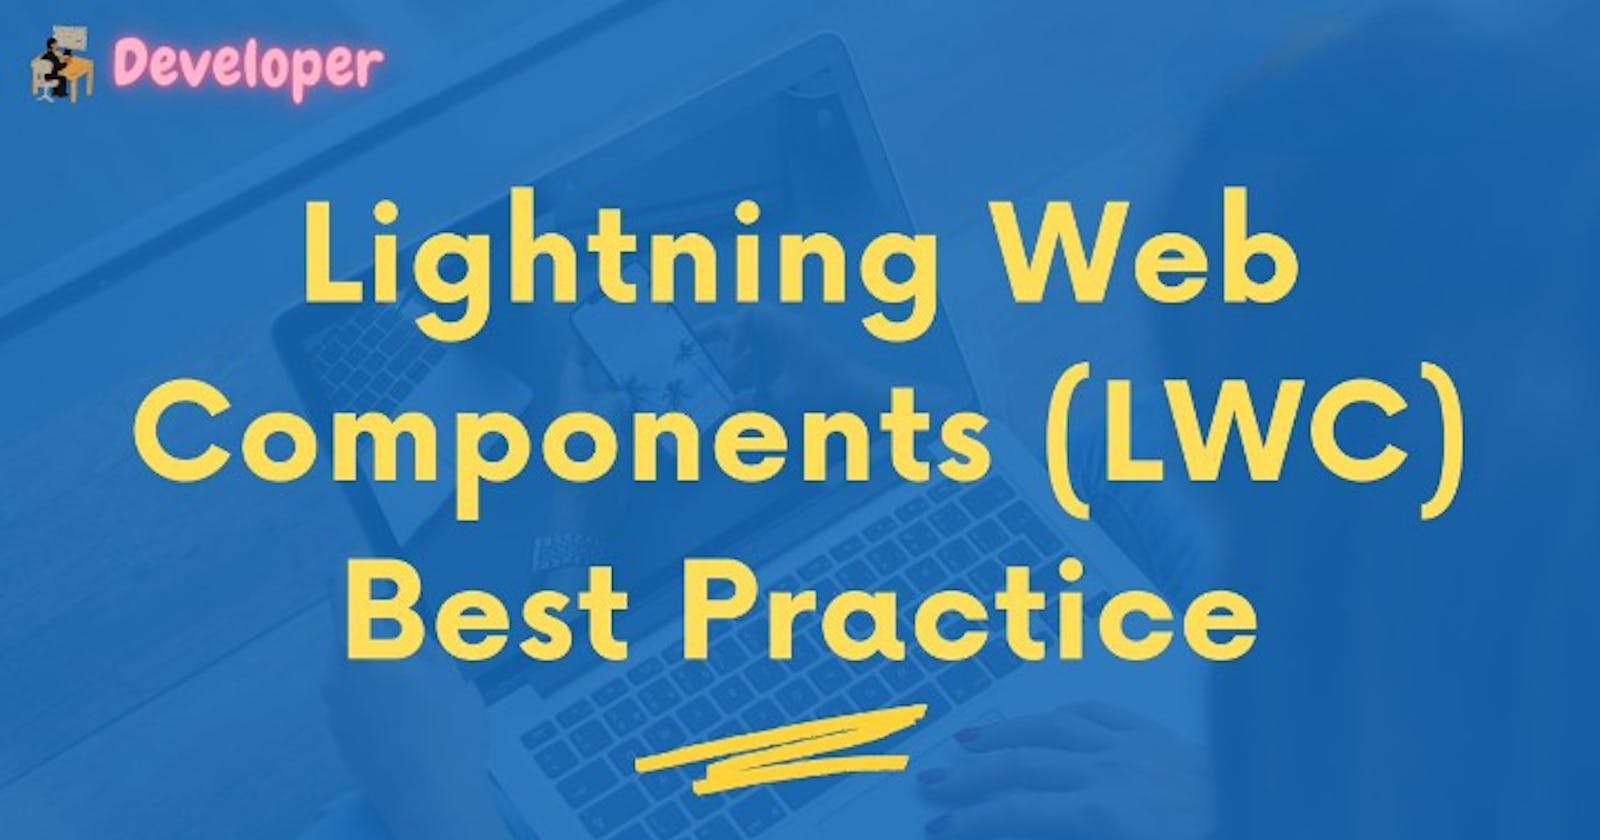 Best Practices for Developing LWC Code in Salesforce: A Comprehensive Guide